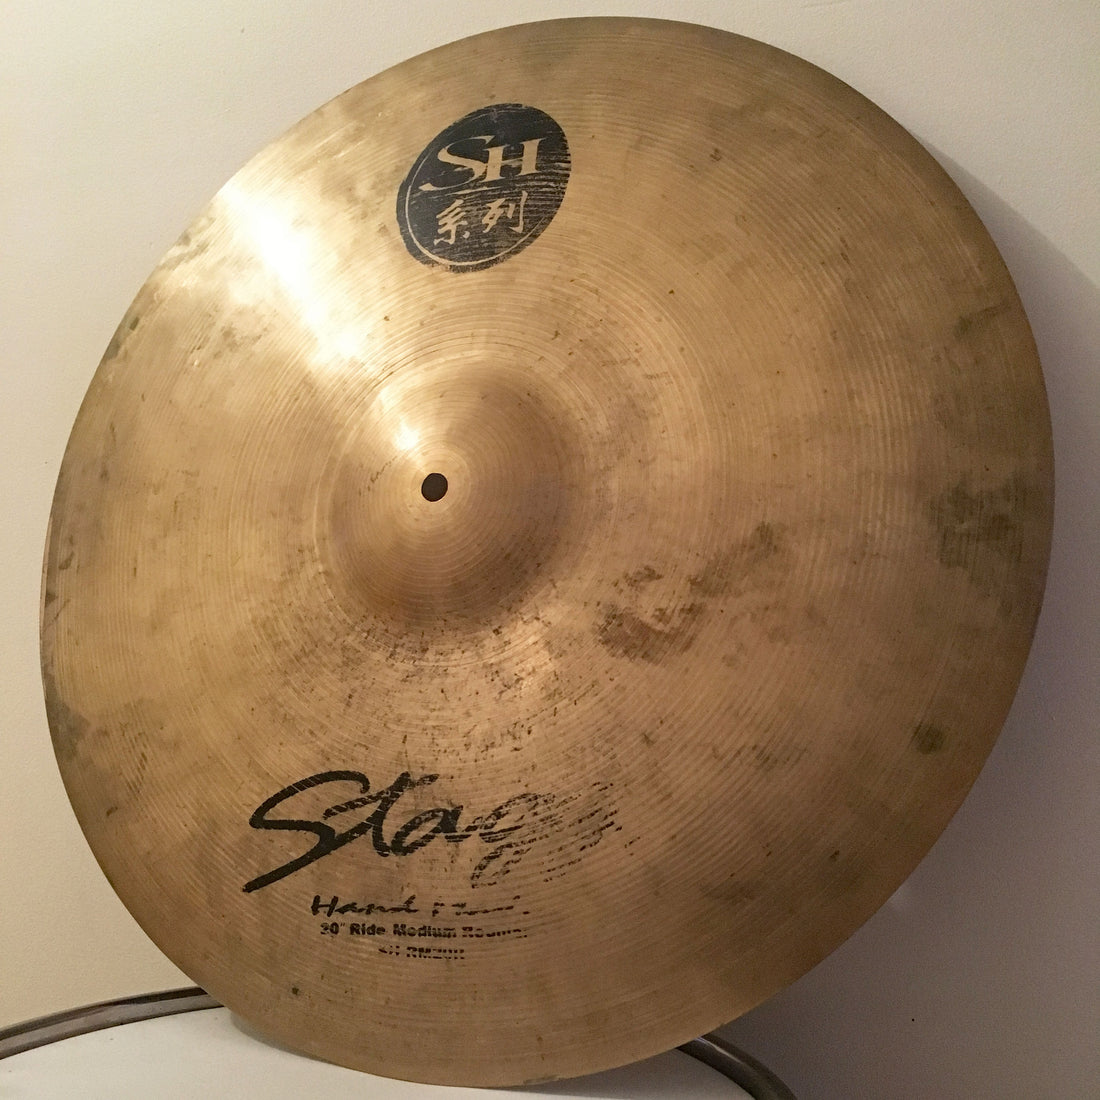 Used Stagg 20" Ride Cymbal